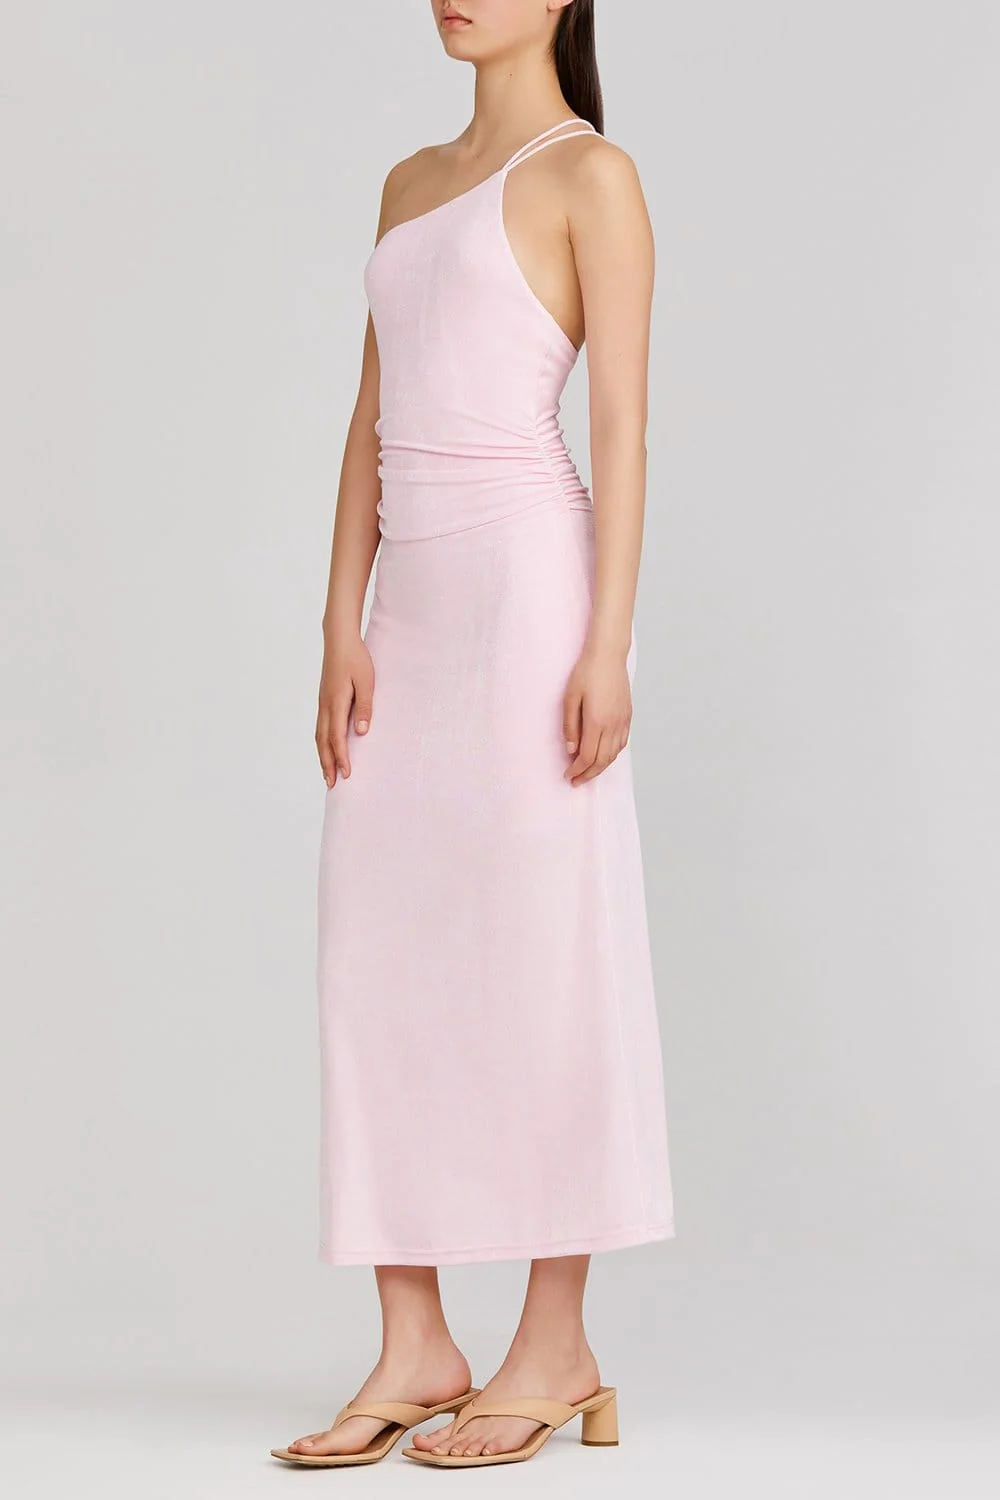 208-significnt-other-bella-midi-dress-pink-side 1400x